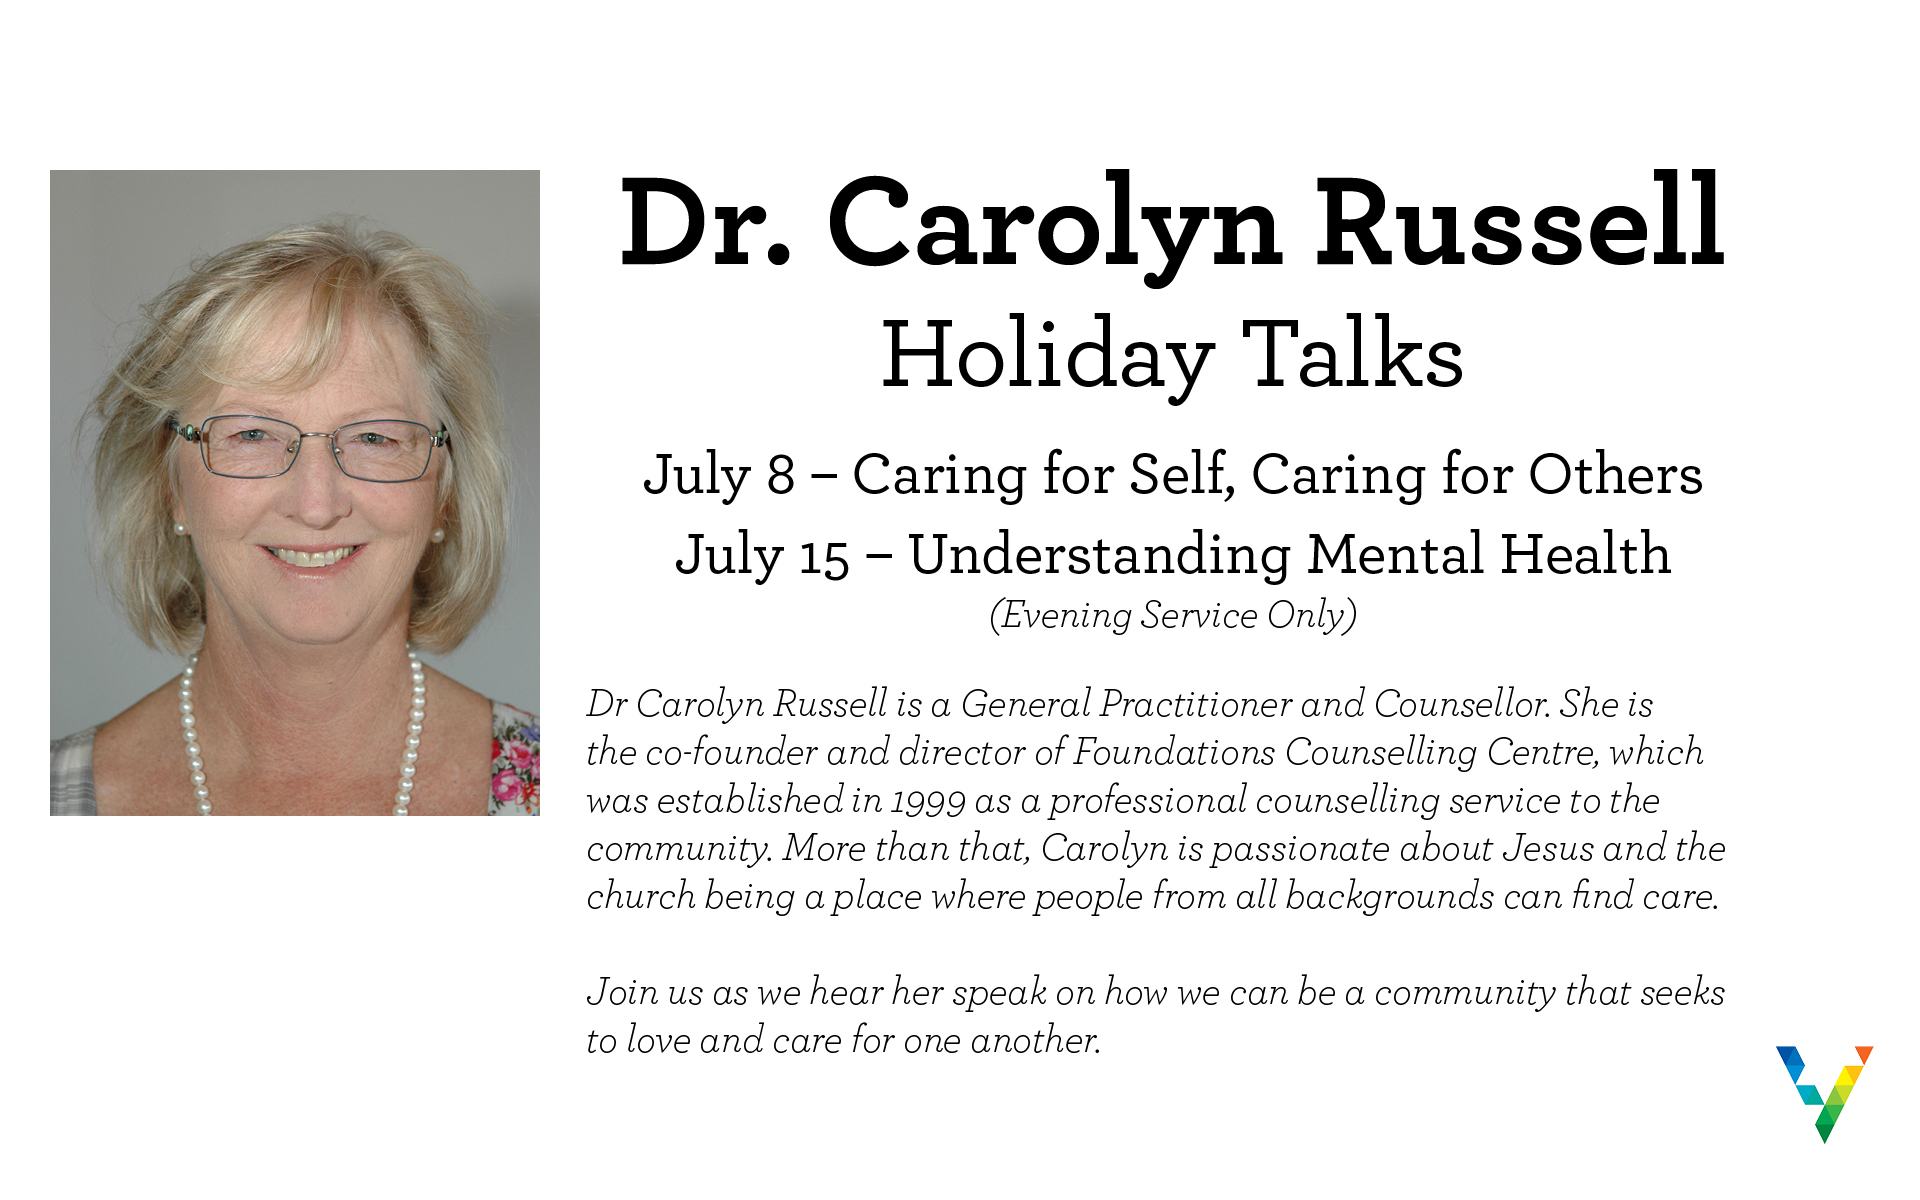 Dr. Carolyn Russell – Caring for Self, Caring for Others